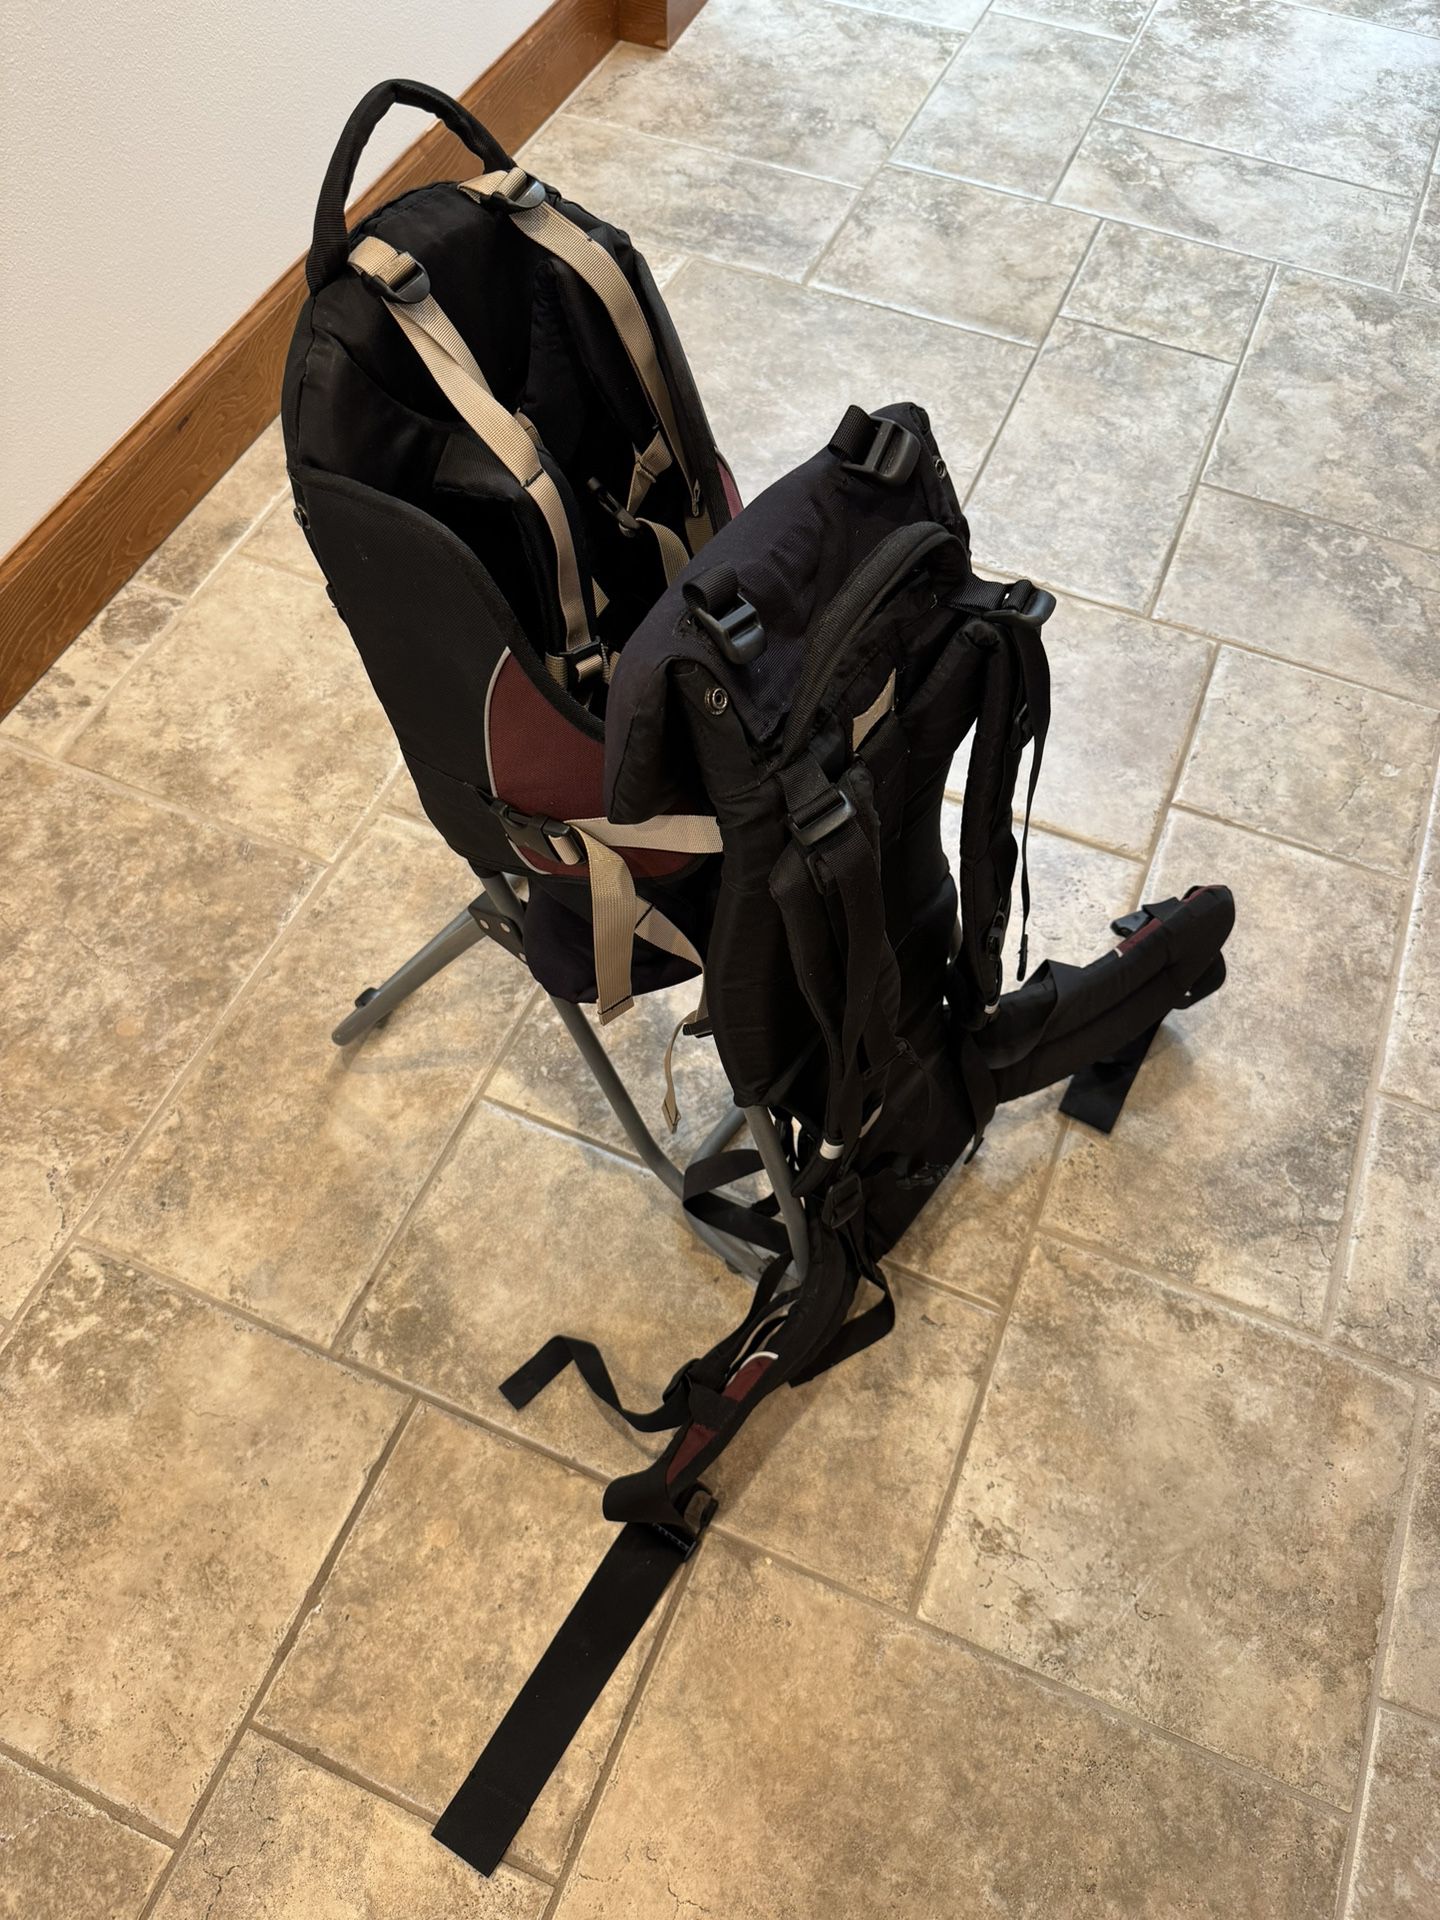 REI Tagalong Child carrier